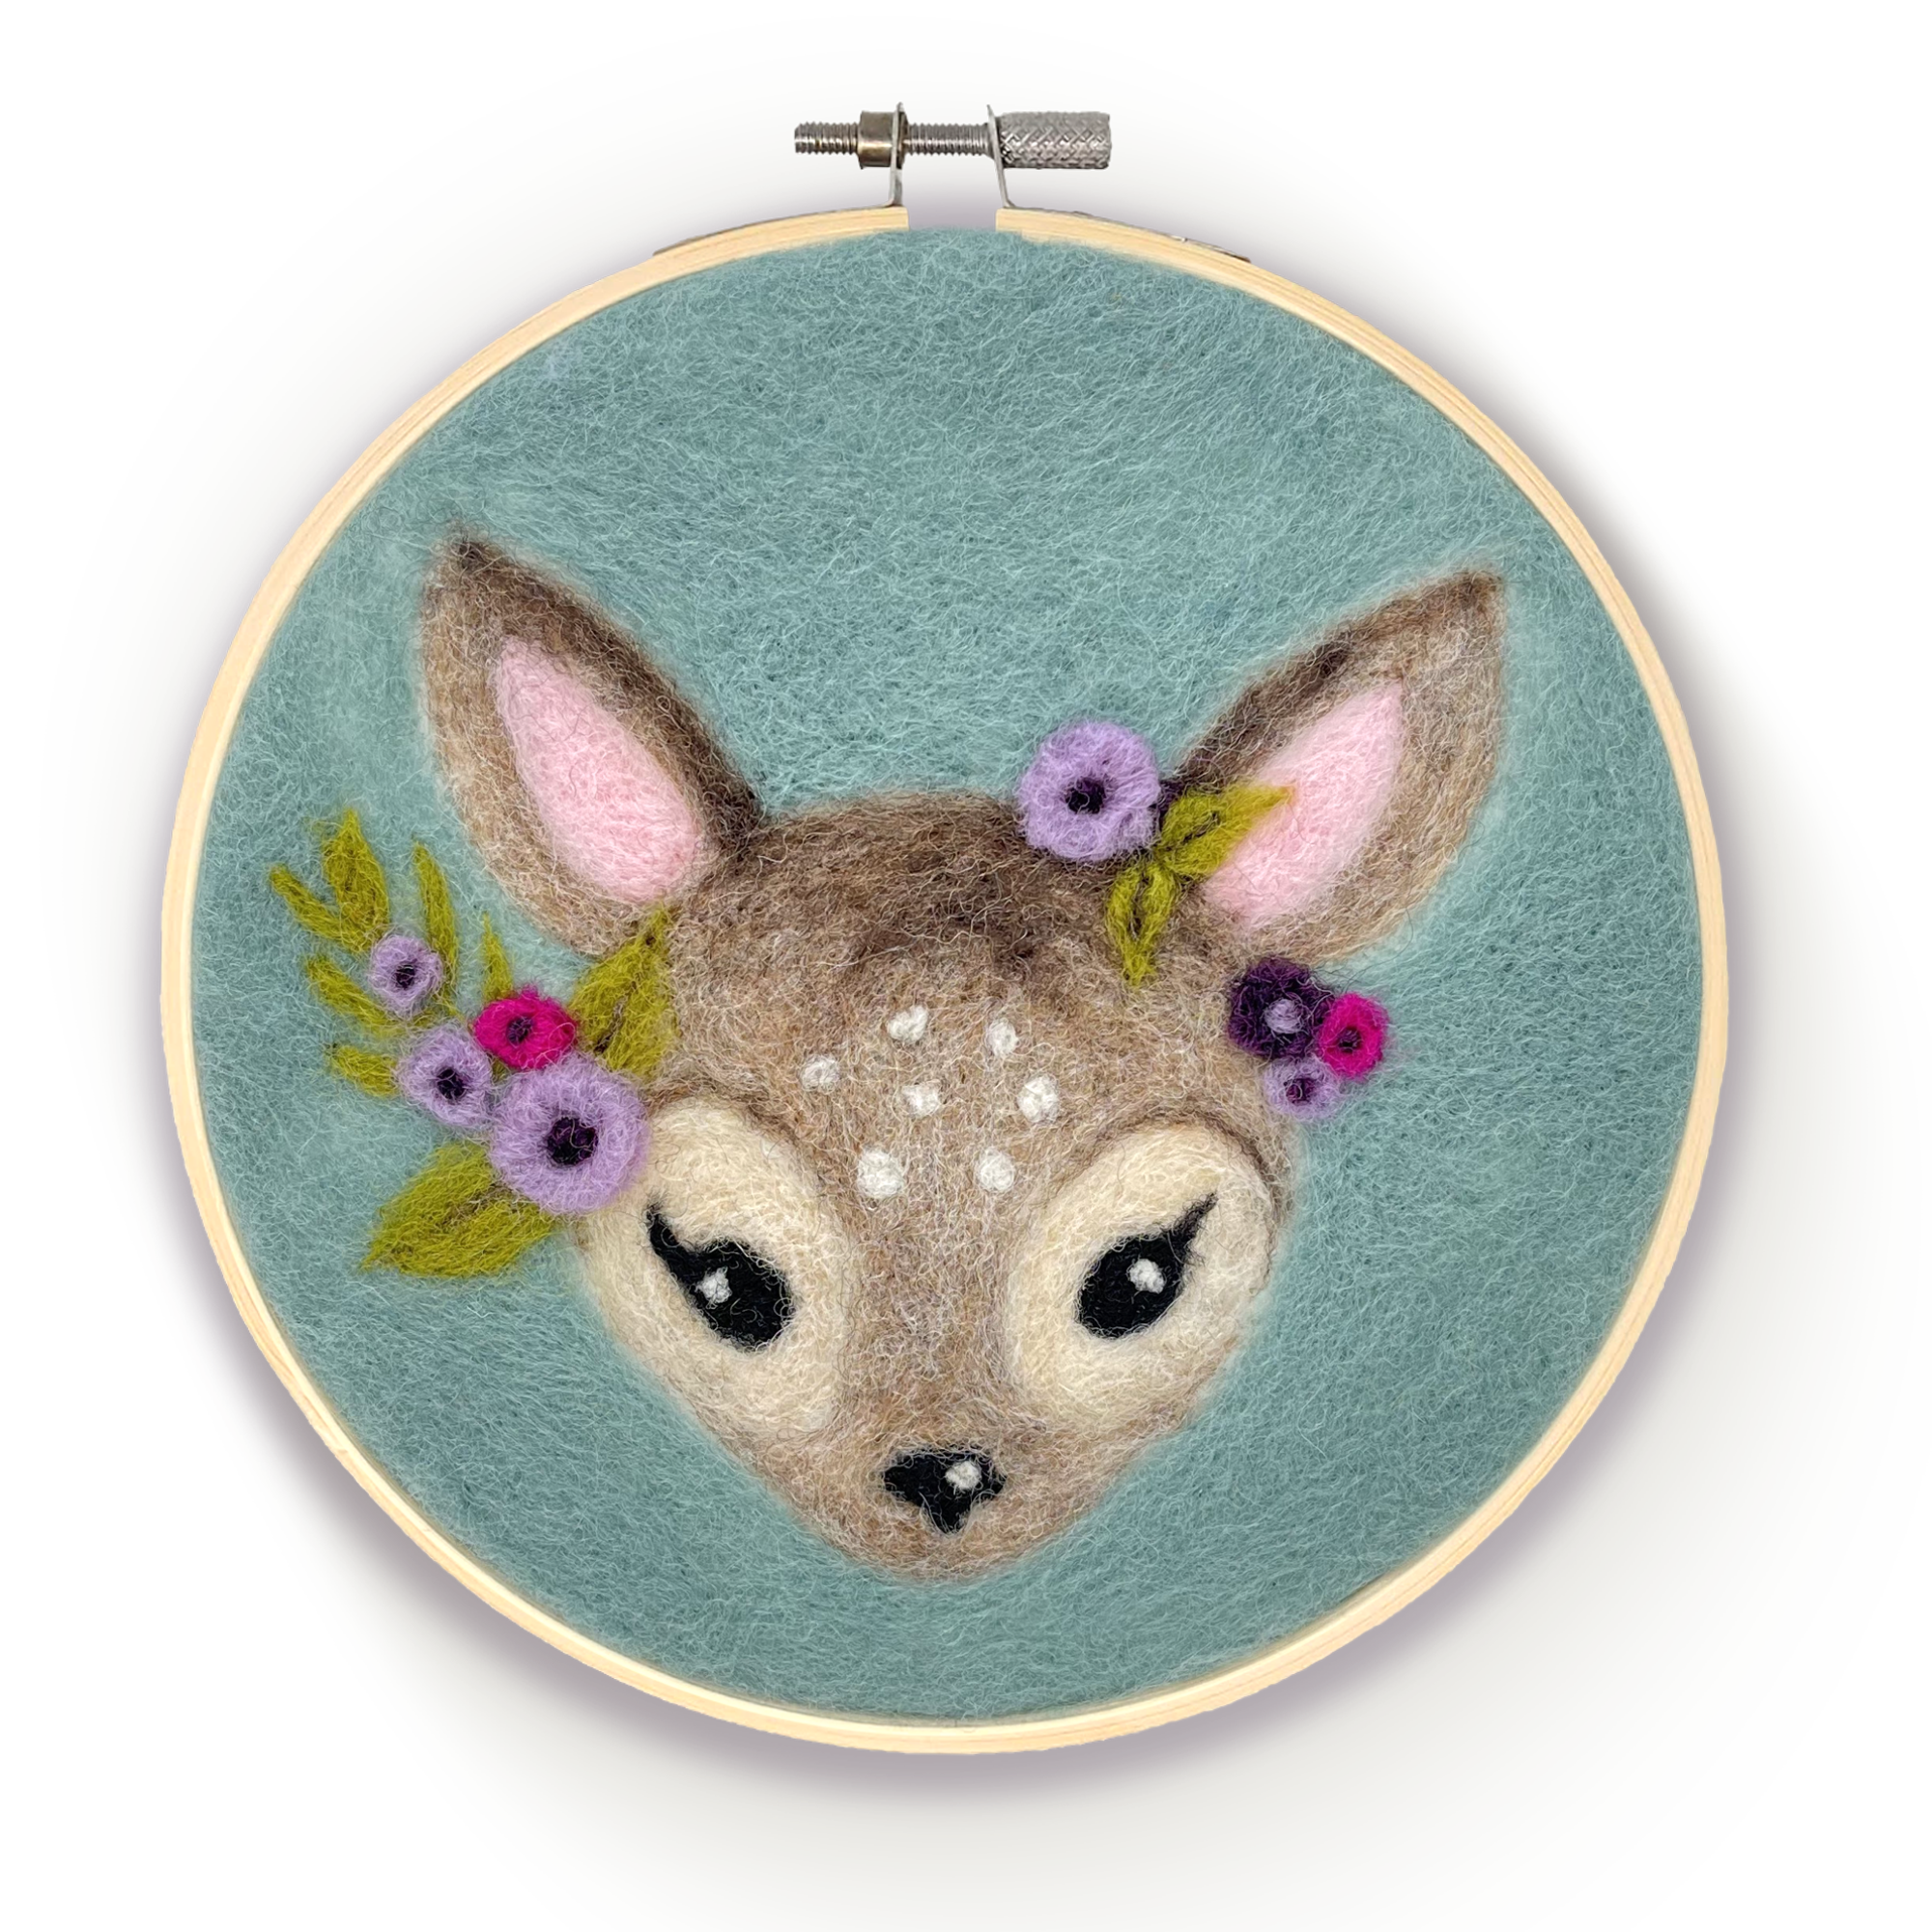 The Crafty Kit Company - Floral Fawn in a Hoop Needle Felt Kit